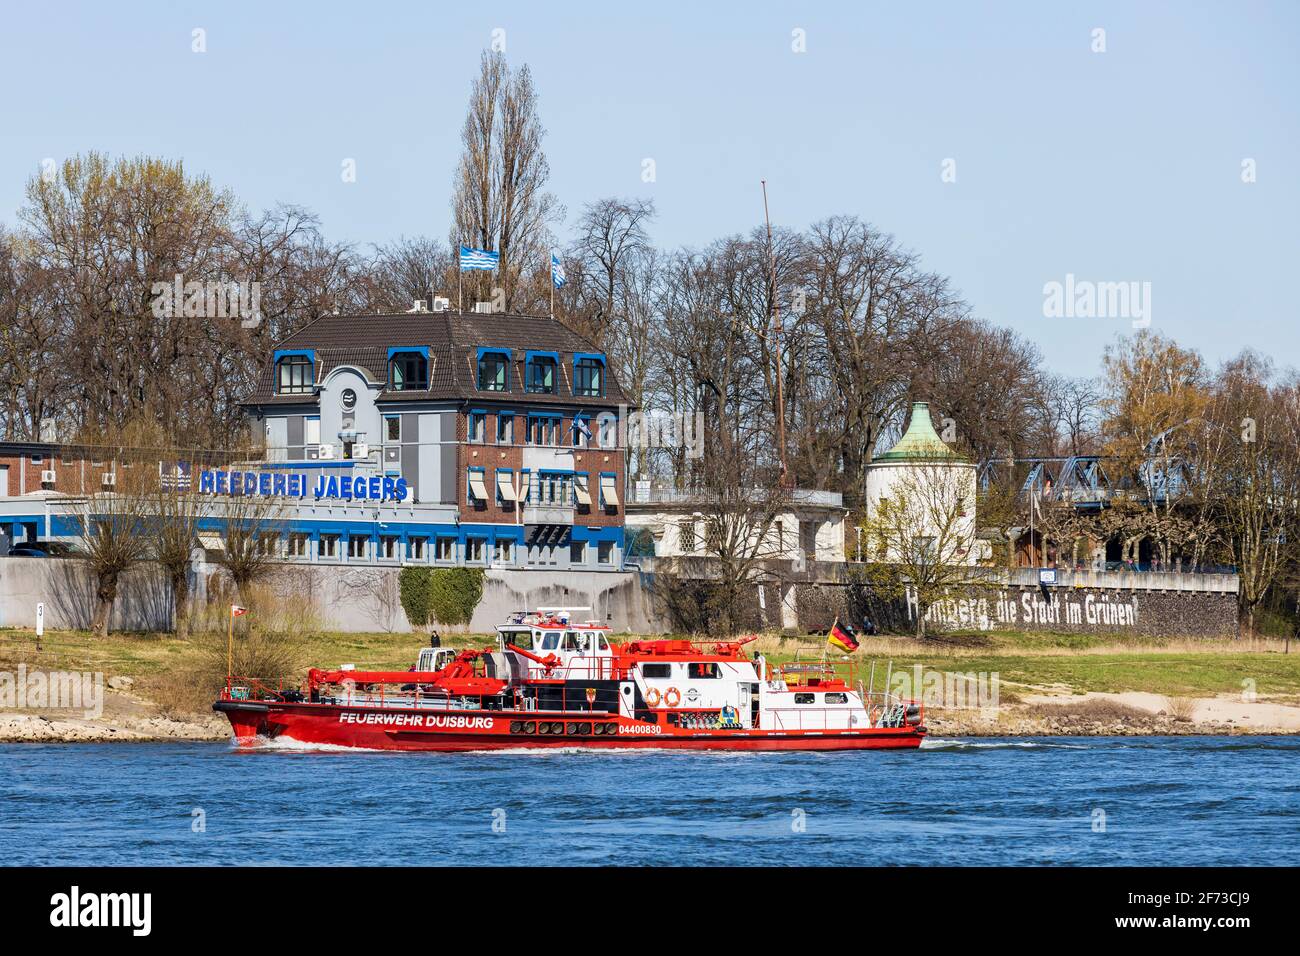 Boat of the fire brigade on the bank of the Rhine river, Duisburg-Homberg, Duisburg, Germany, Europe Stock Photo